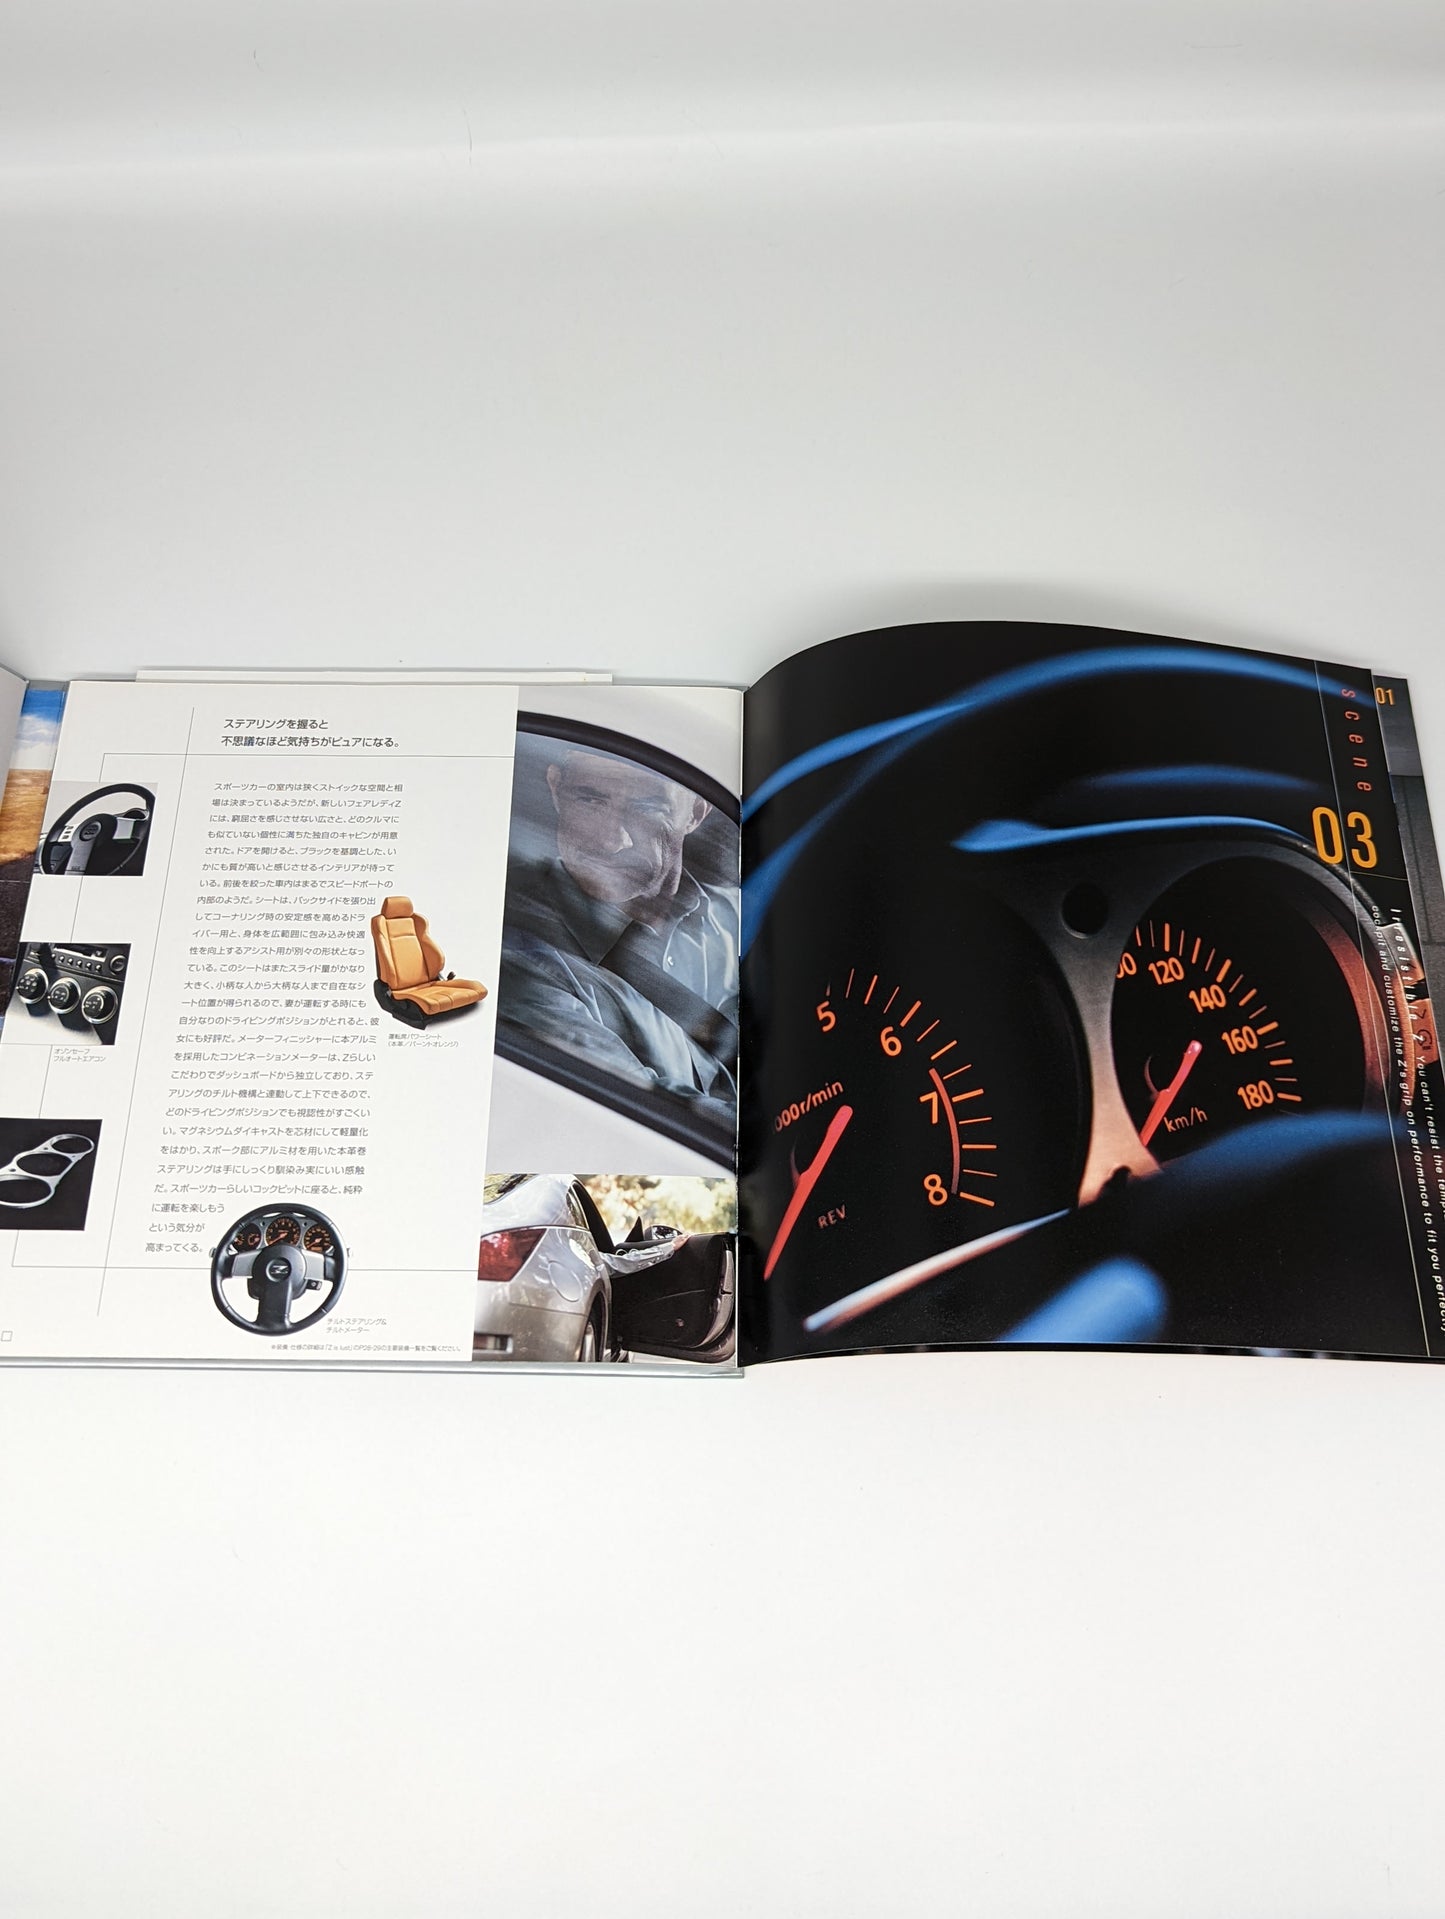 350z Japanese dealership book/point of sale